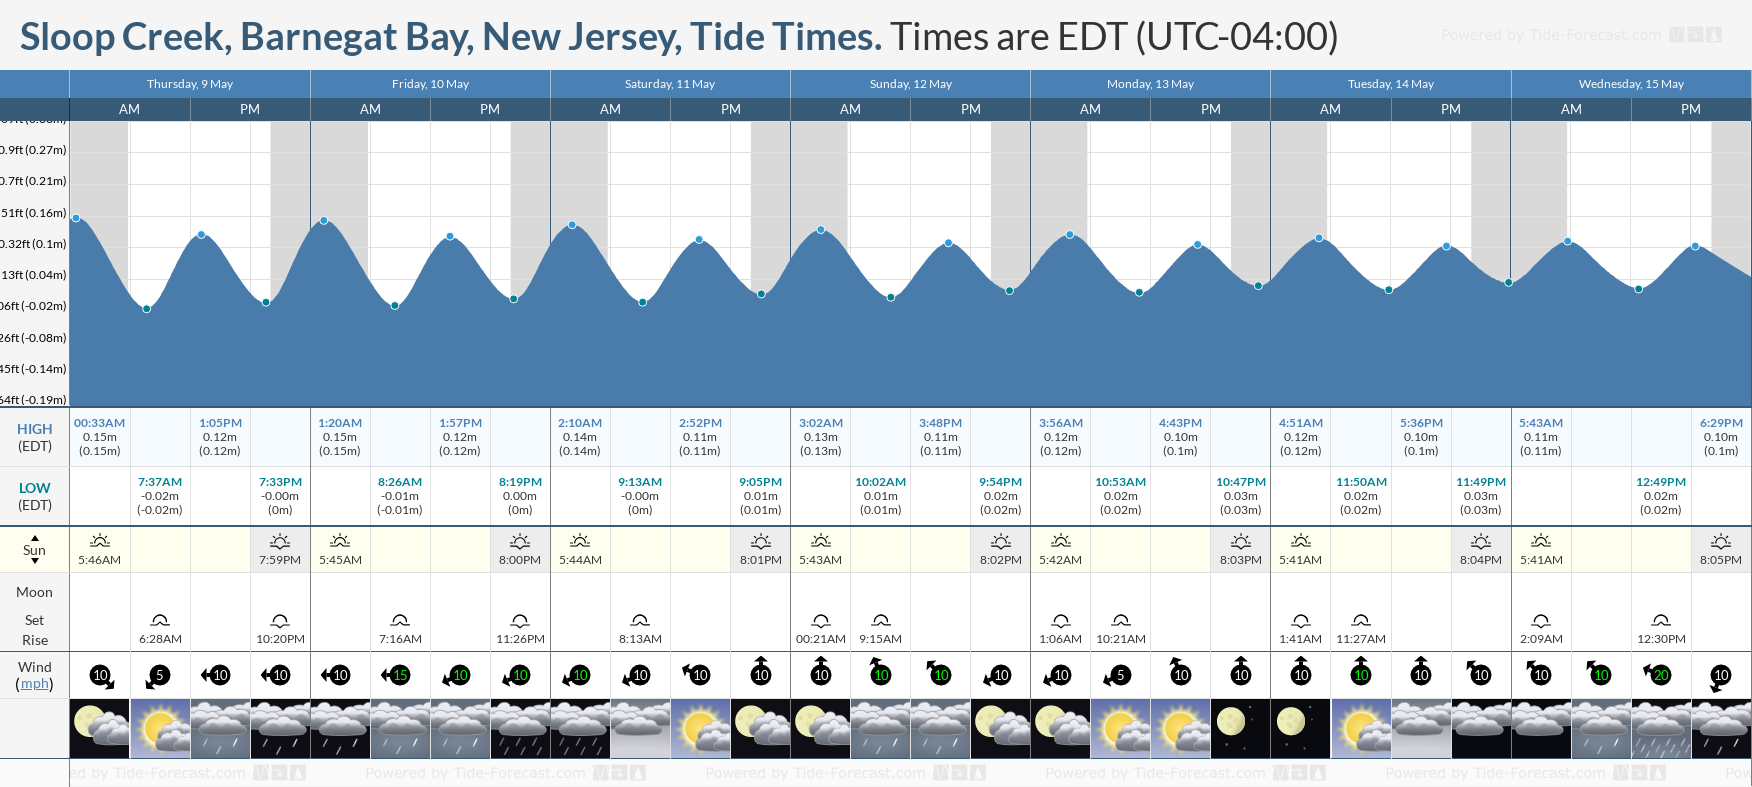 Sloop Creek, Barnegat Bay, New Jersey Tide Chart including high and low tide tide times for the next 7 days